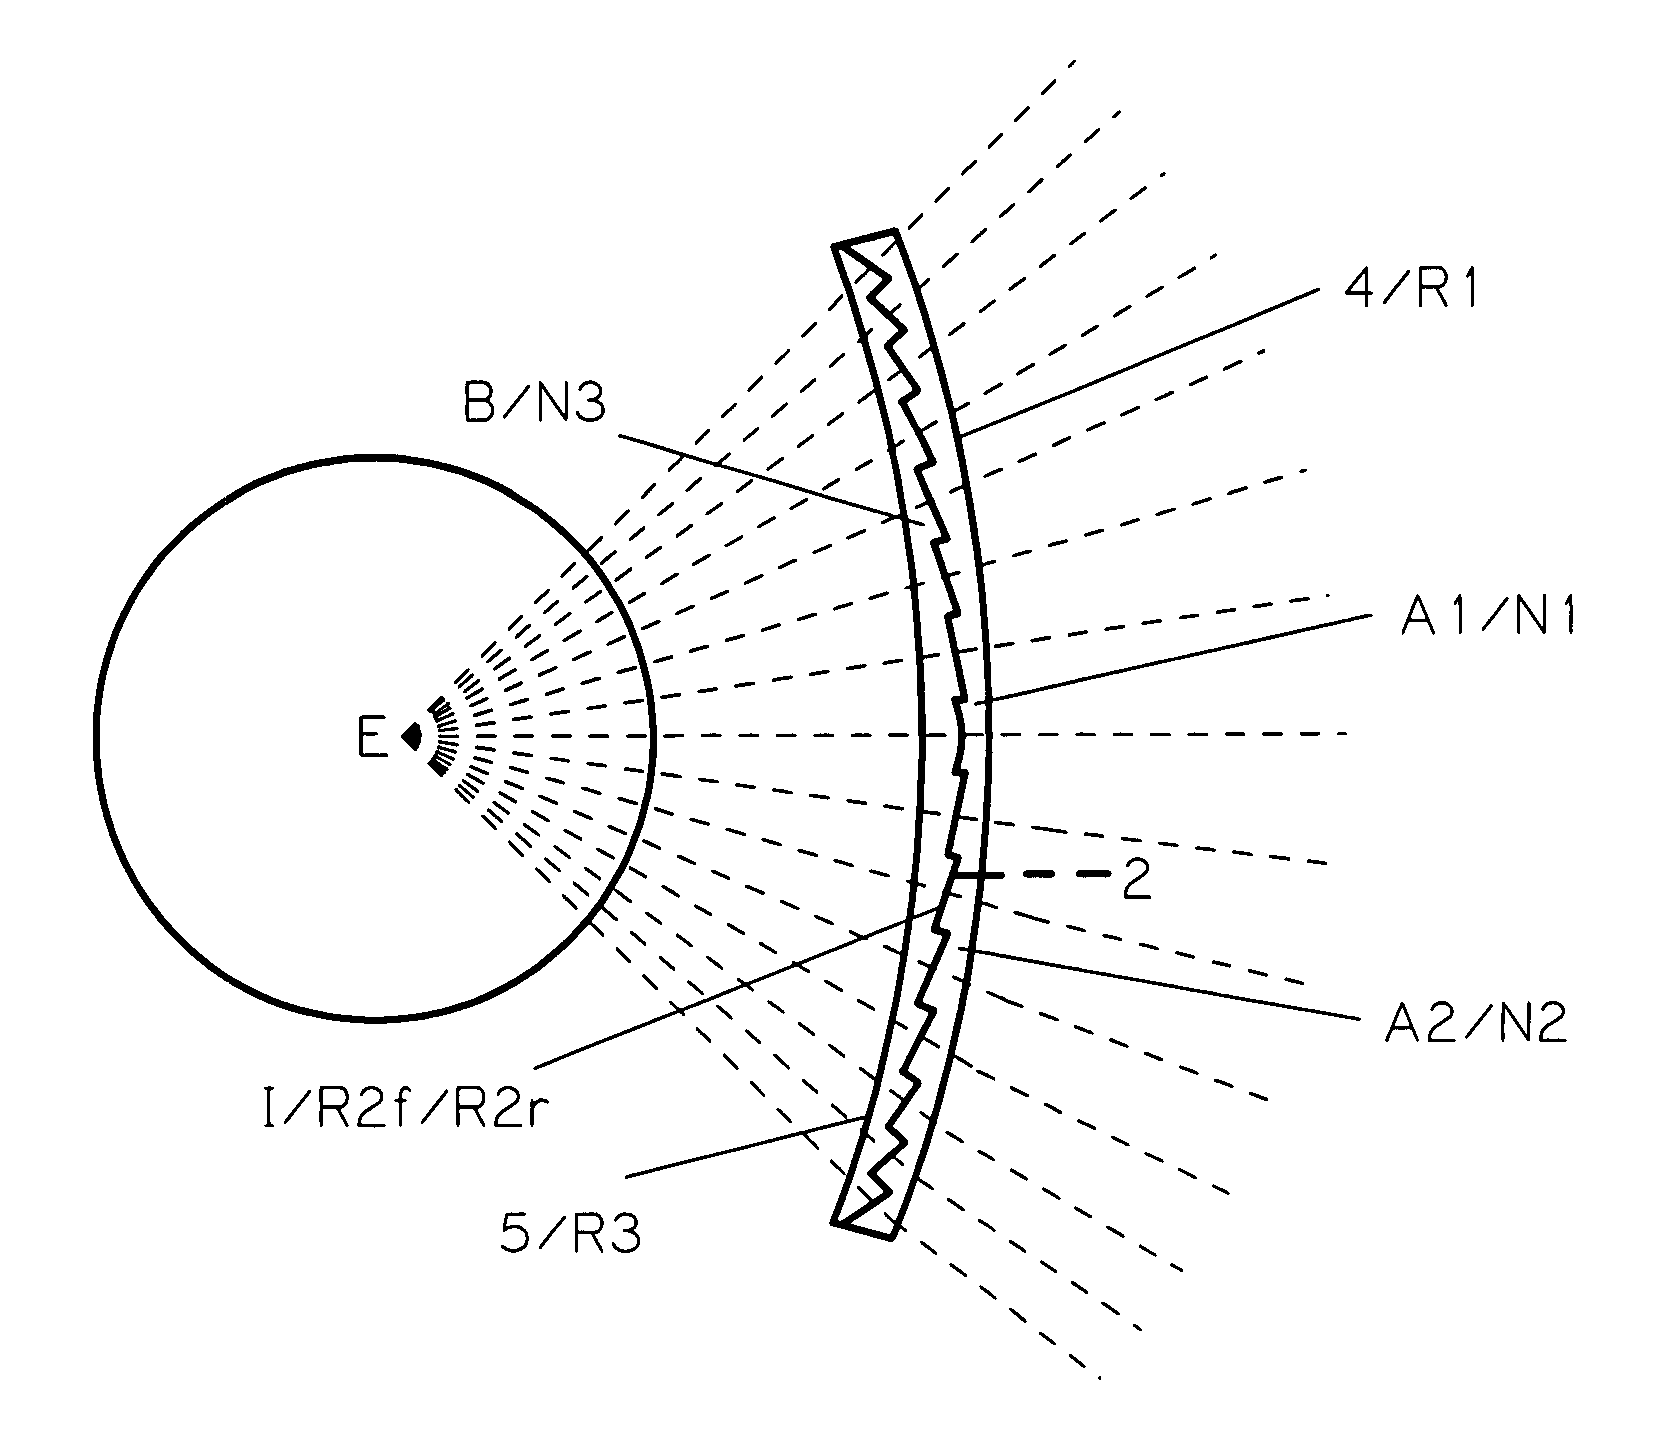 Multi-layered multifocal lens with blended refractive index